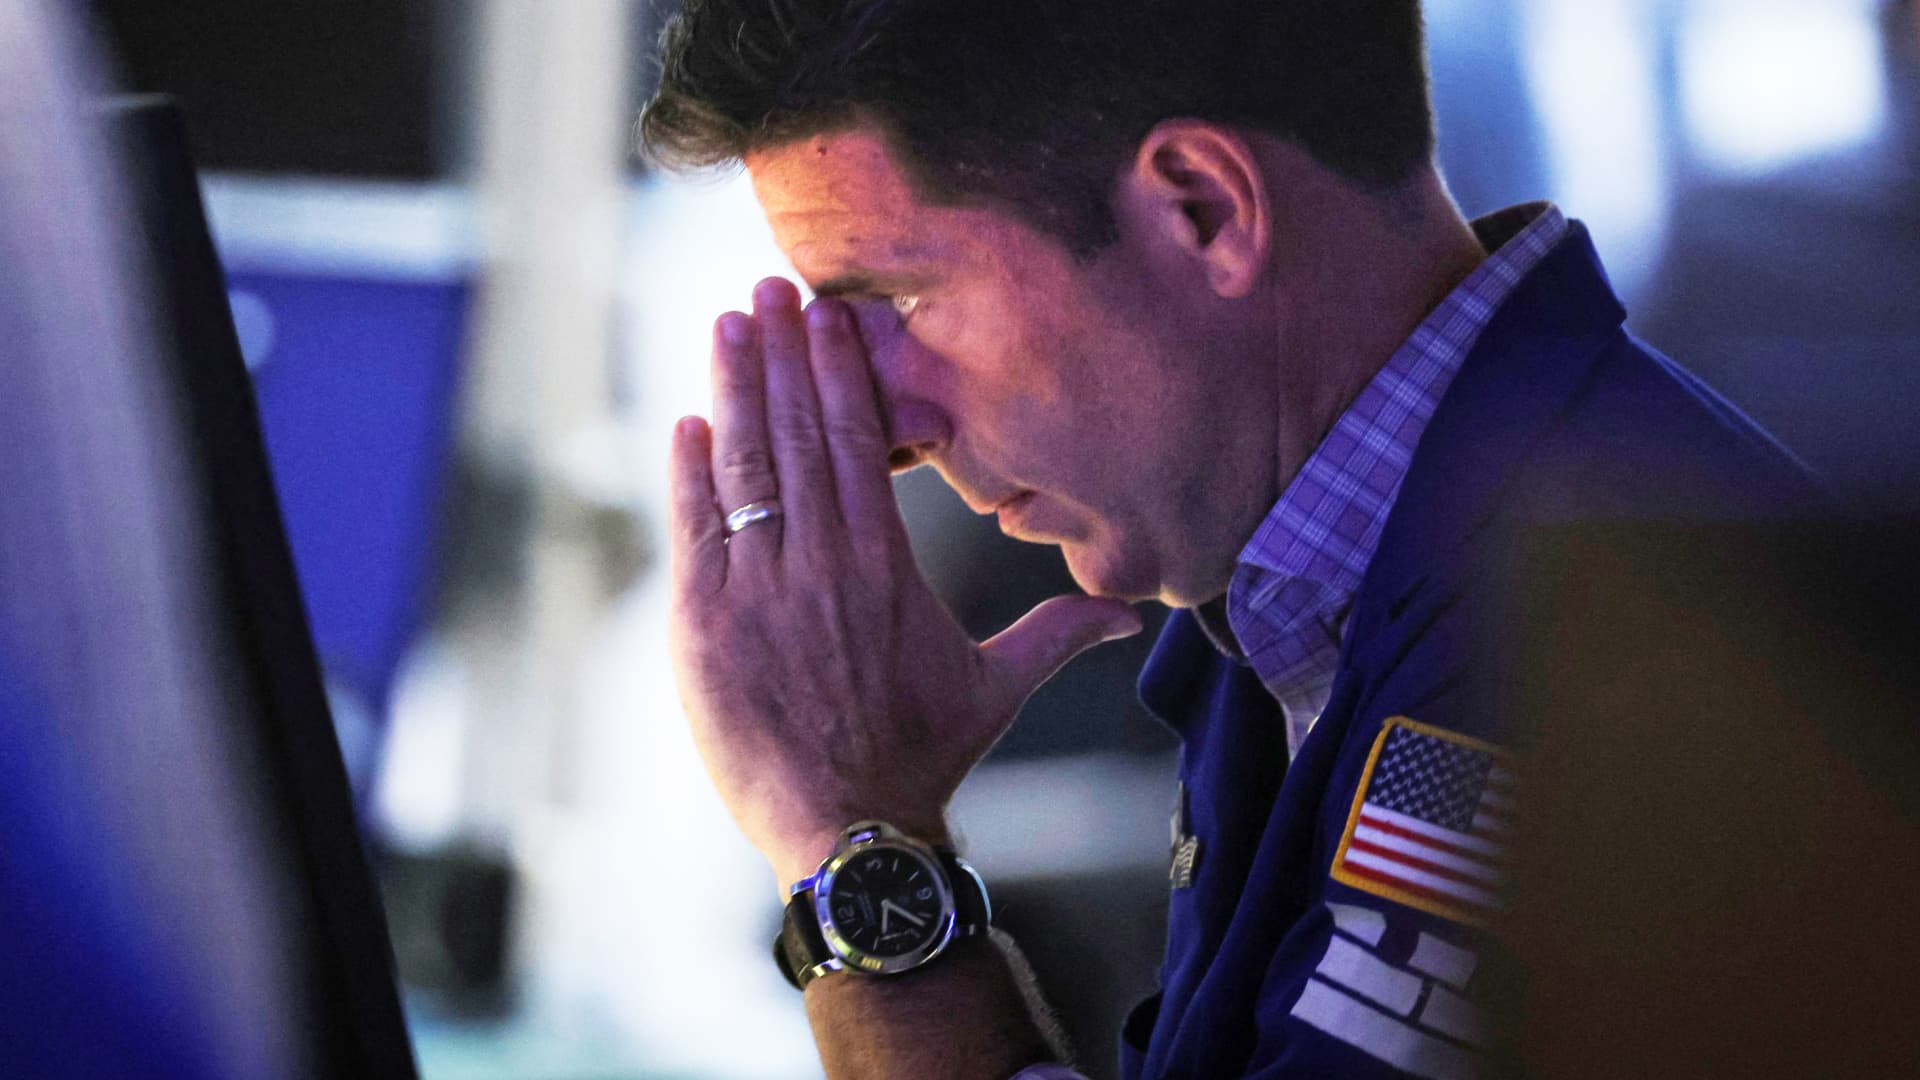 Traders worry there are more earnings warnings like FedEx’s about to come out